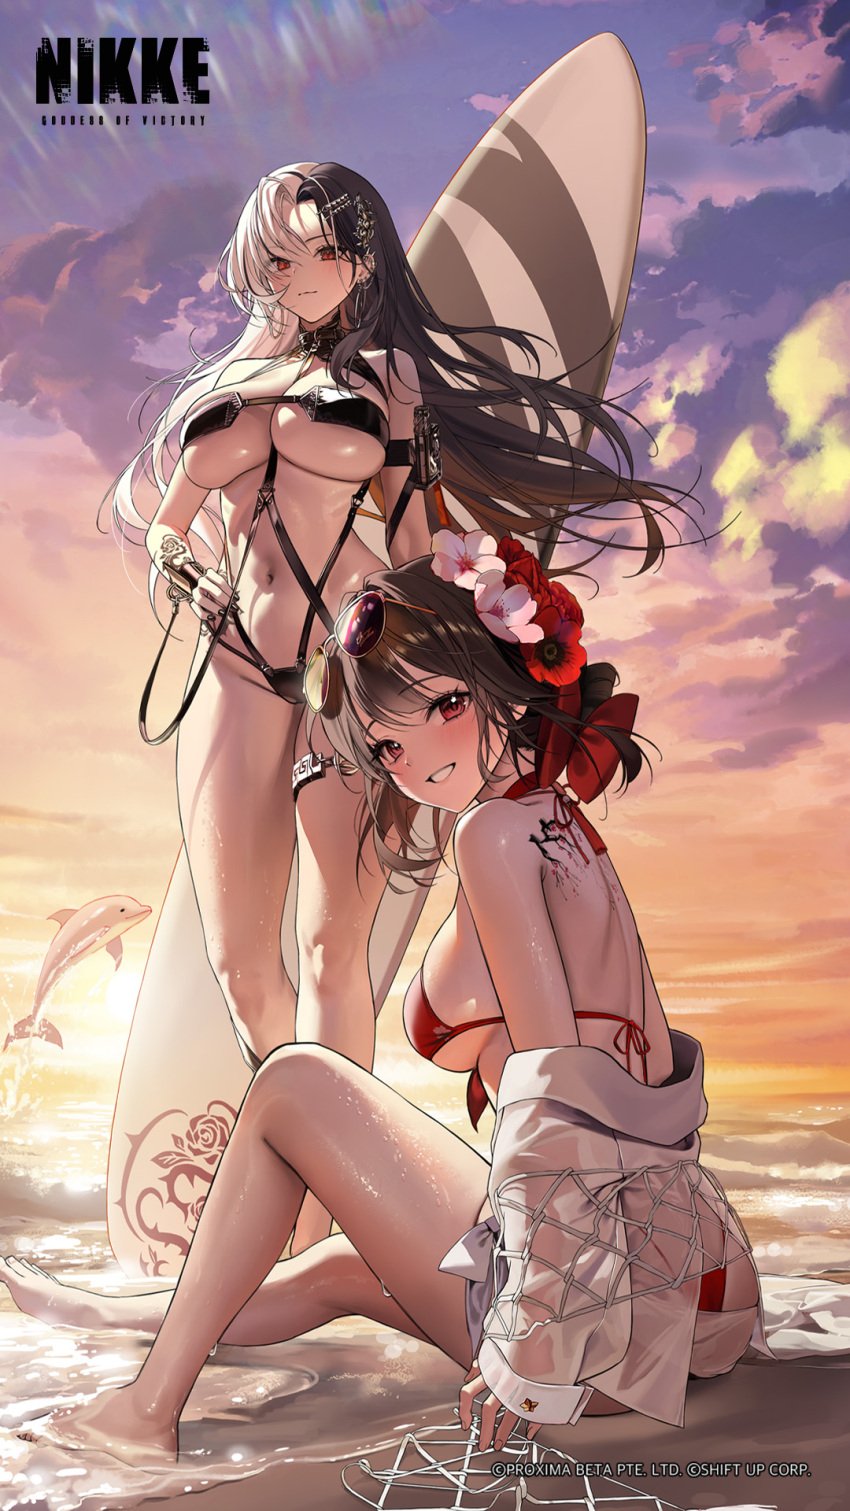 2girls alternate_version_available amber_eyes arm_tattoo ass back_tattoo barely_clothed barely_contained beach belly_button bikini black_hair blush blushing_at_viewer cameltoe dolphin ear_piercing feet flower flower_in_hair game_cg goddess_of_victory:_nikke hi_res high_resolution highres huge_ass huge_breasts large_breasts multiple_girls ocean official_art piercing red_eyes rosanna_(chic_ocean)_(nikke) rosanna_(nikke) sakura_(bloom_in_summer)_(nikke) sakura_(nikke) shaved_crotch shaved_pussy shirt sideboob sitting smile smiling smiling_at_viewer standing sunset surfboard swimsuit tattoo tattooed_arm tattoos thick_thighs thighs underboob water wet wet_body white_hair